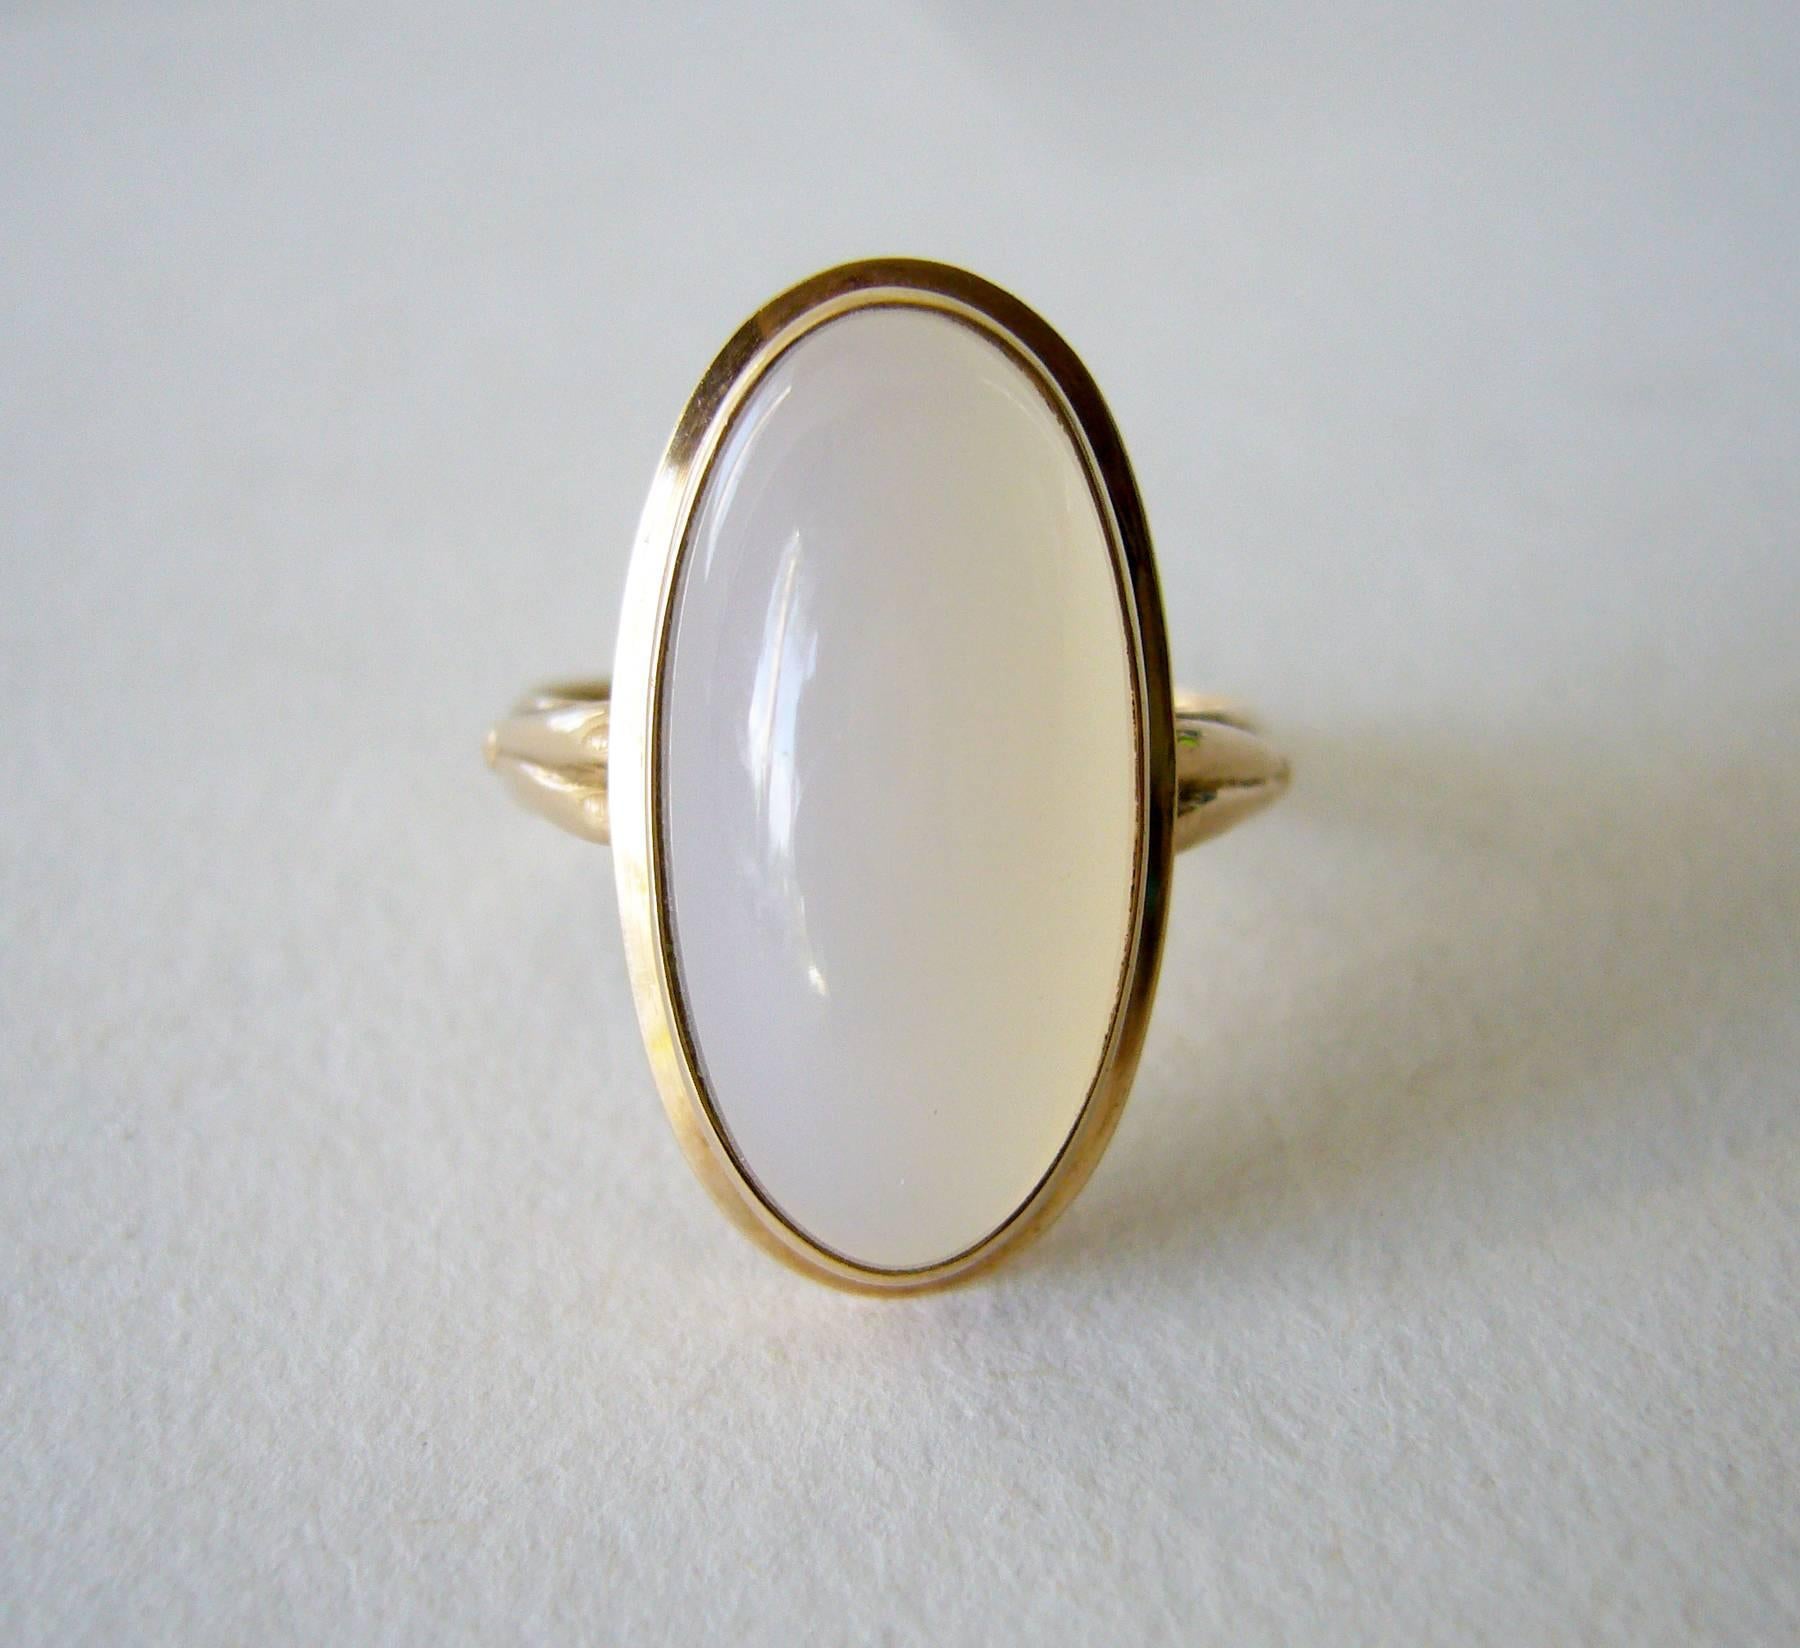 Finnish modernist 14k gold set with large moonstone cabochon, circa 1959. Ring is a finger size 8.25 to 8.5 and is signed HJR, Finnish Hallmarks, 585, F7 (1959).  Ring is suitable for a modern day version of a wedding or engagement ring.  In